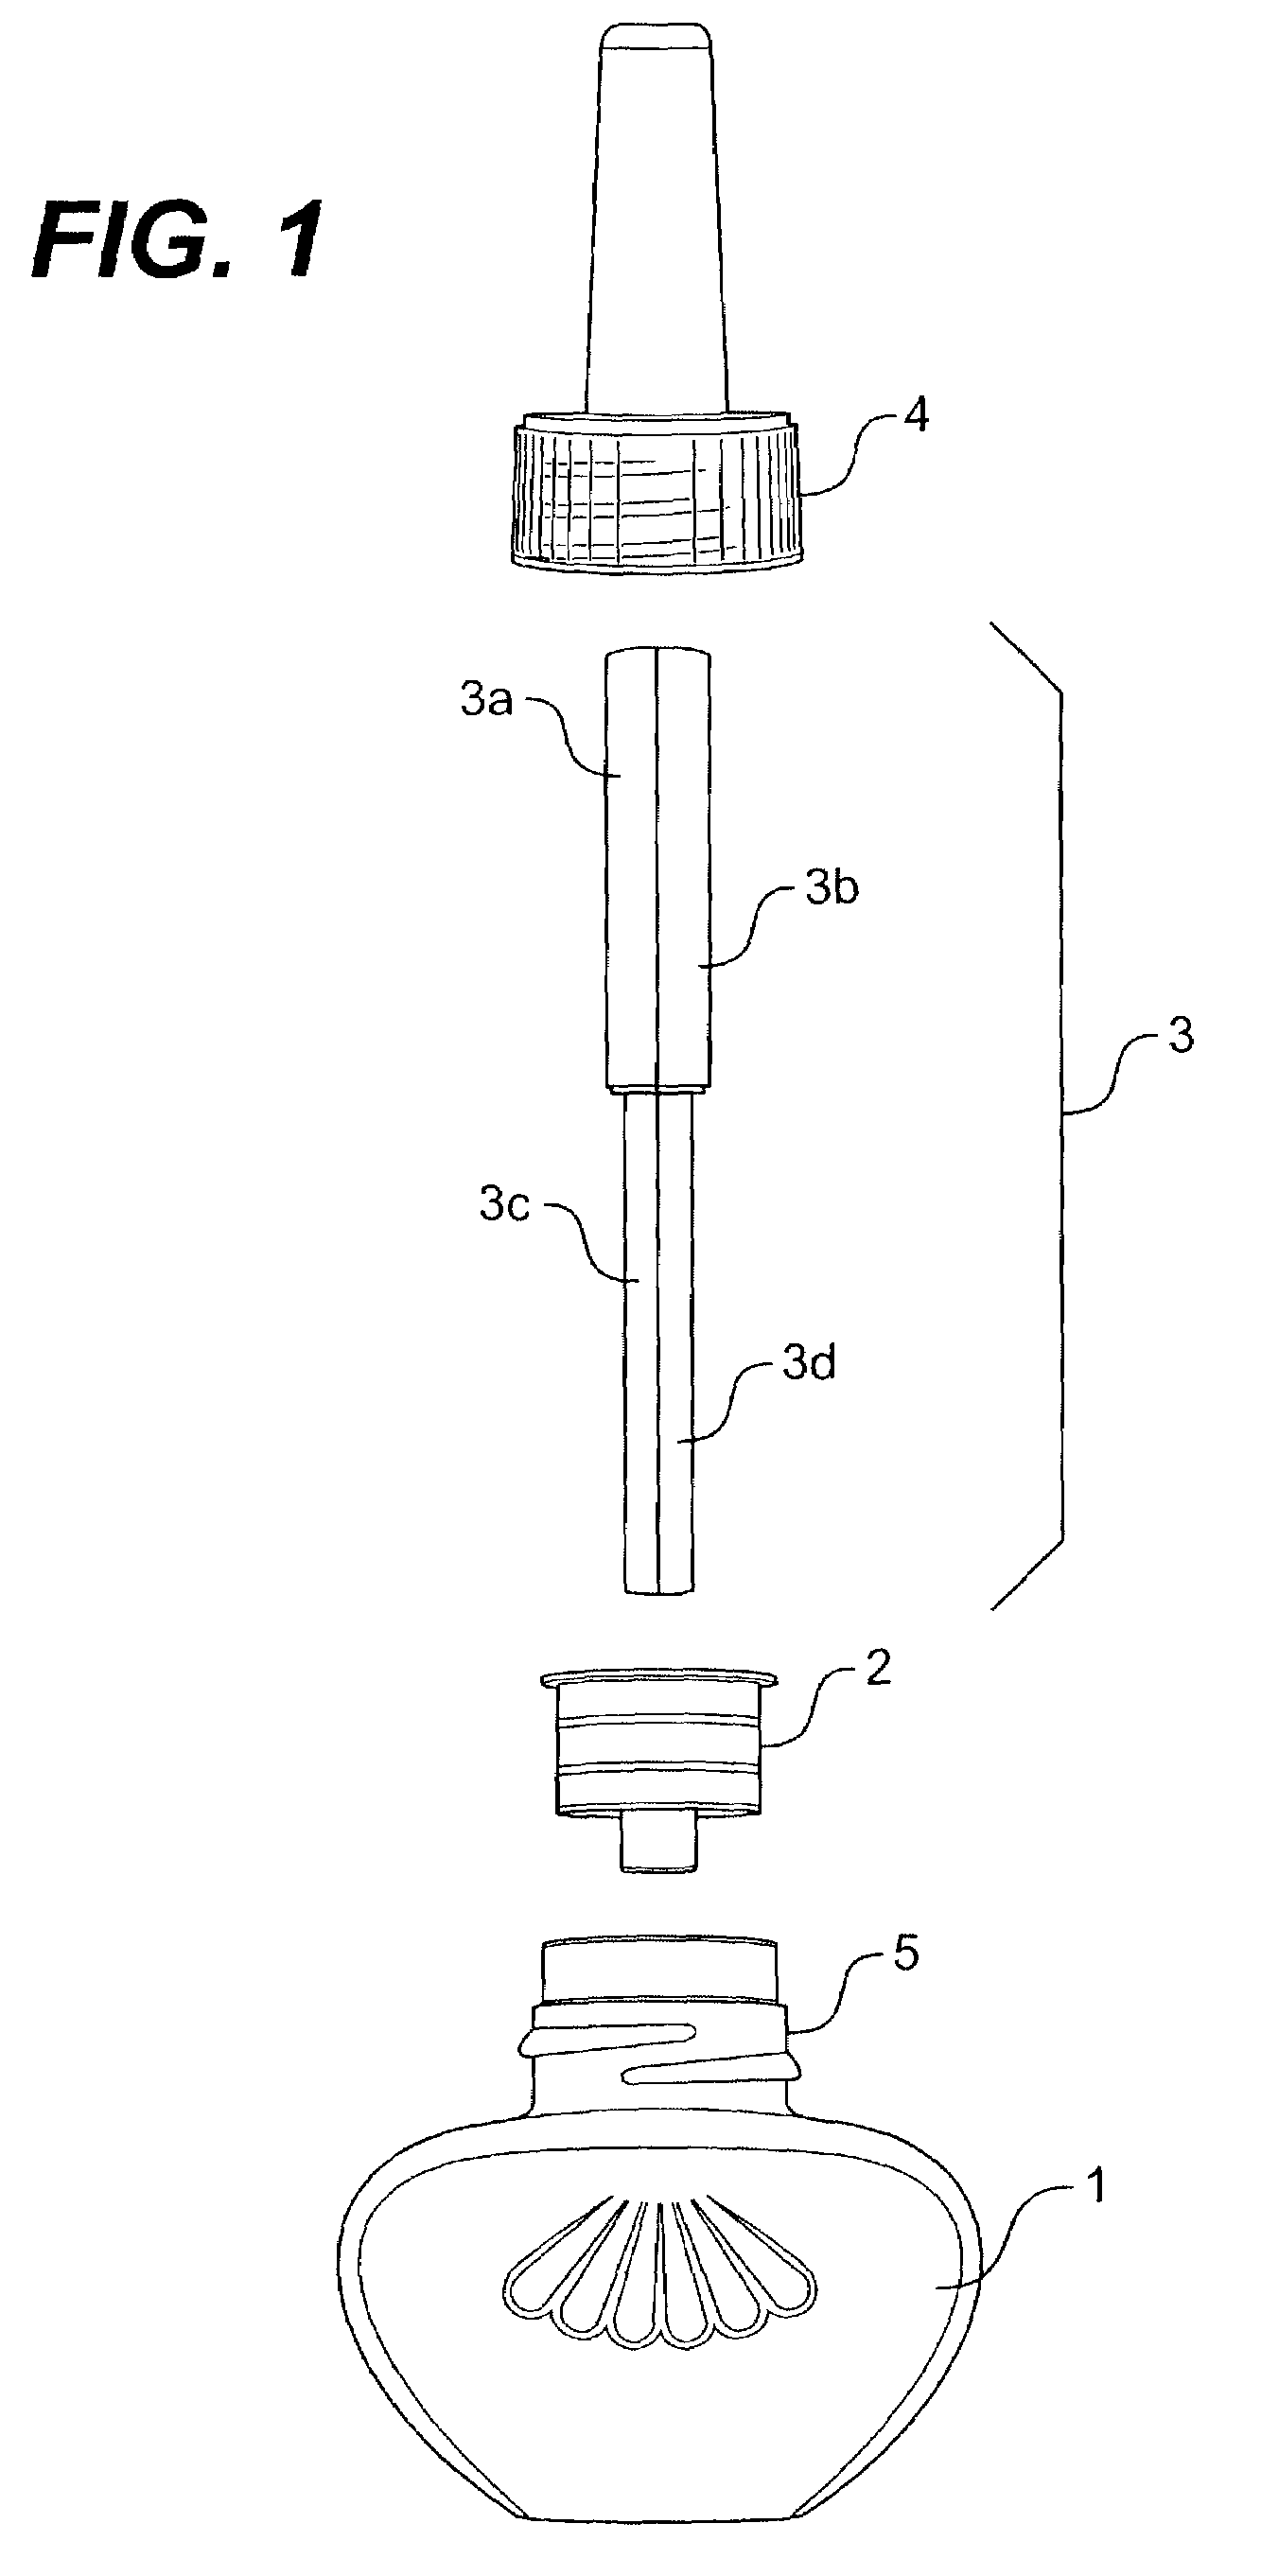 Wick-based delivery system with wick made of different composite materials